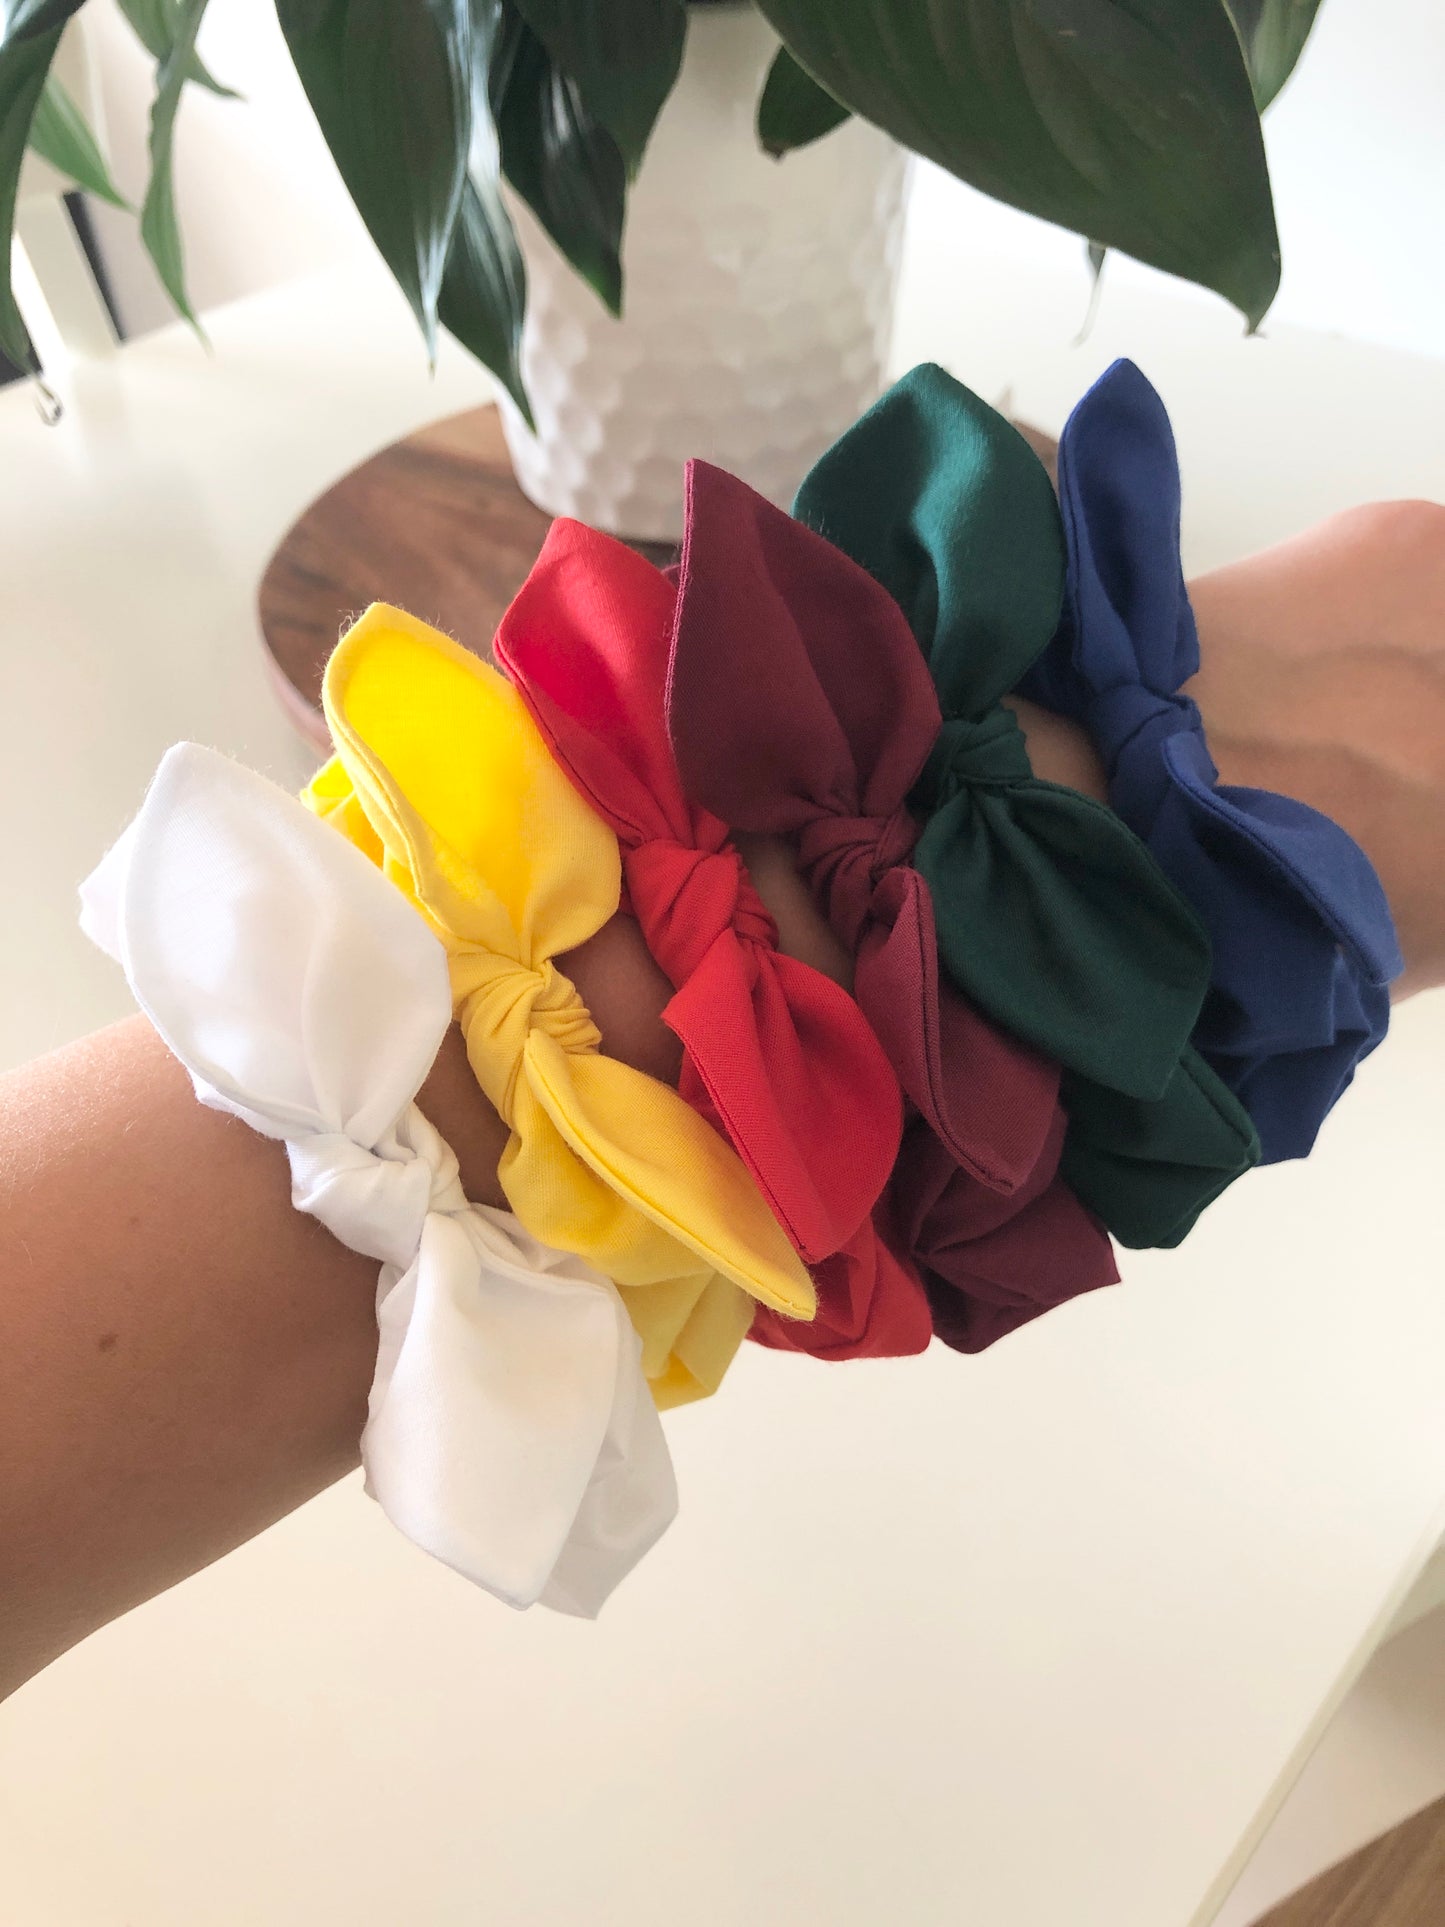 Bow Scrunchies - Back to School